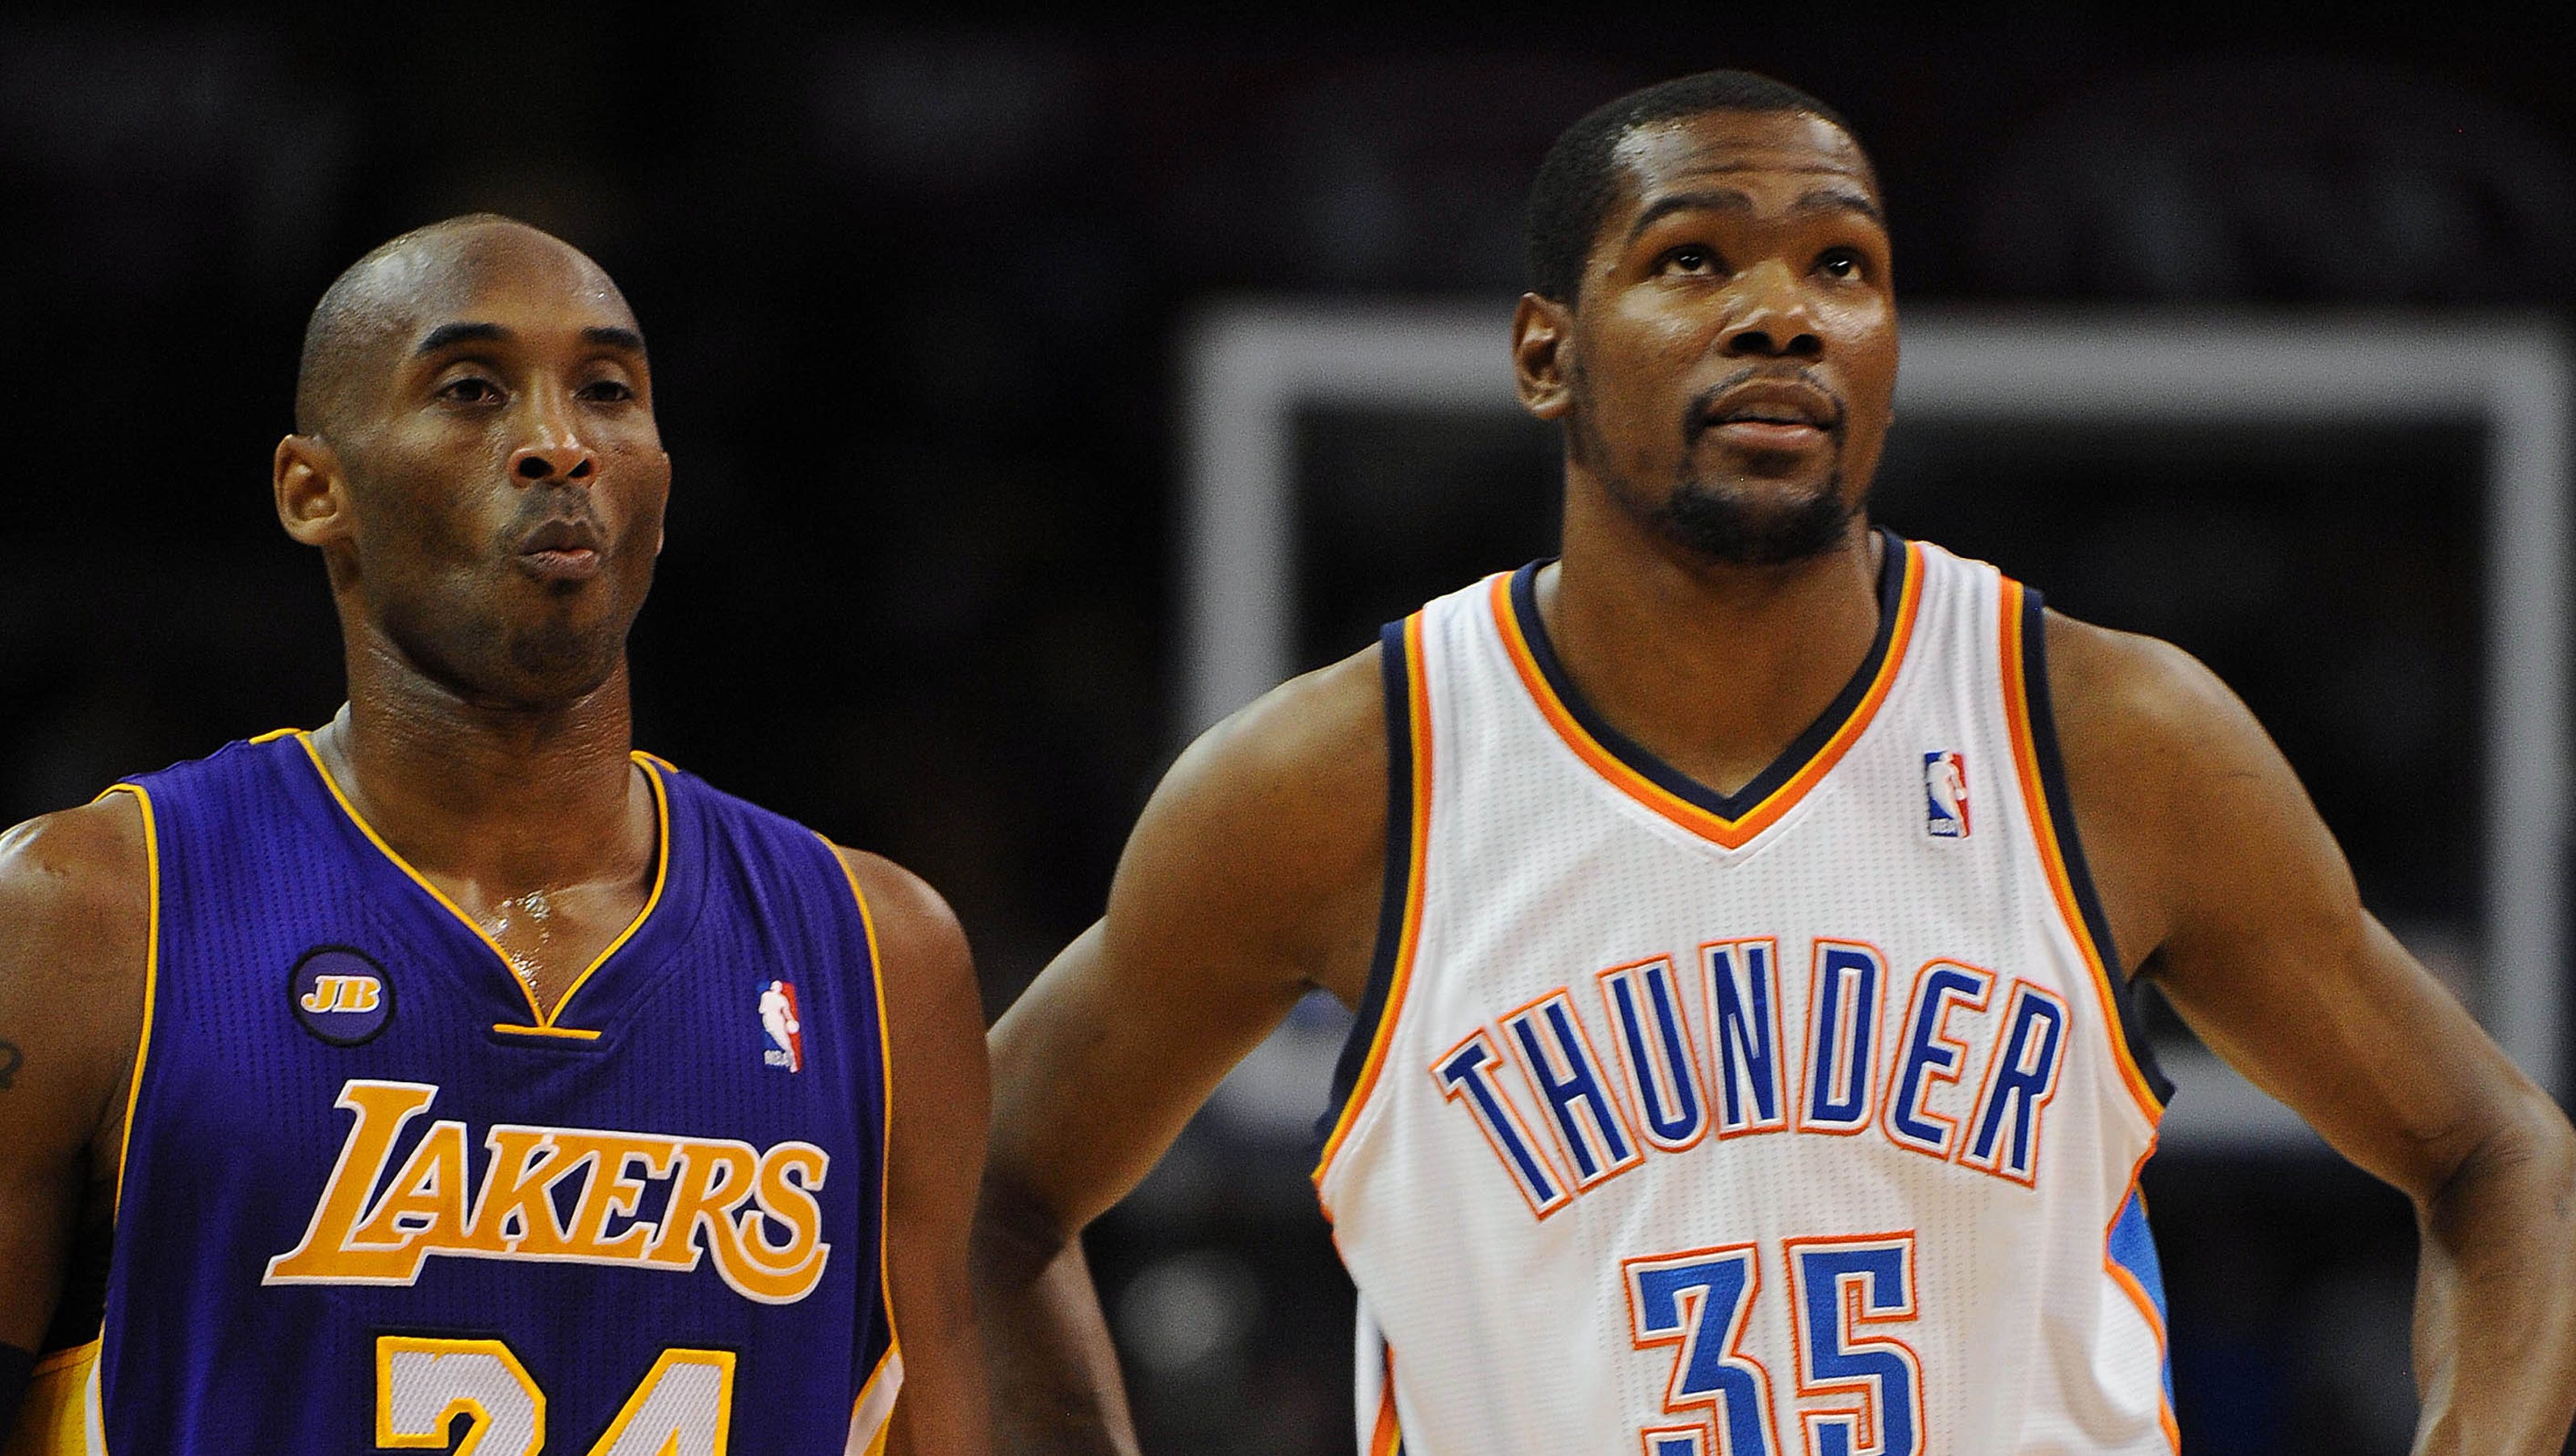 Kevin Durant on Kobe Bryant: 'I'd want to play with a guy like that'